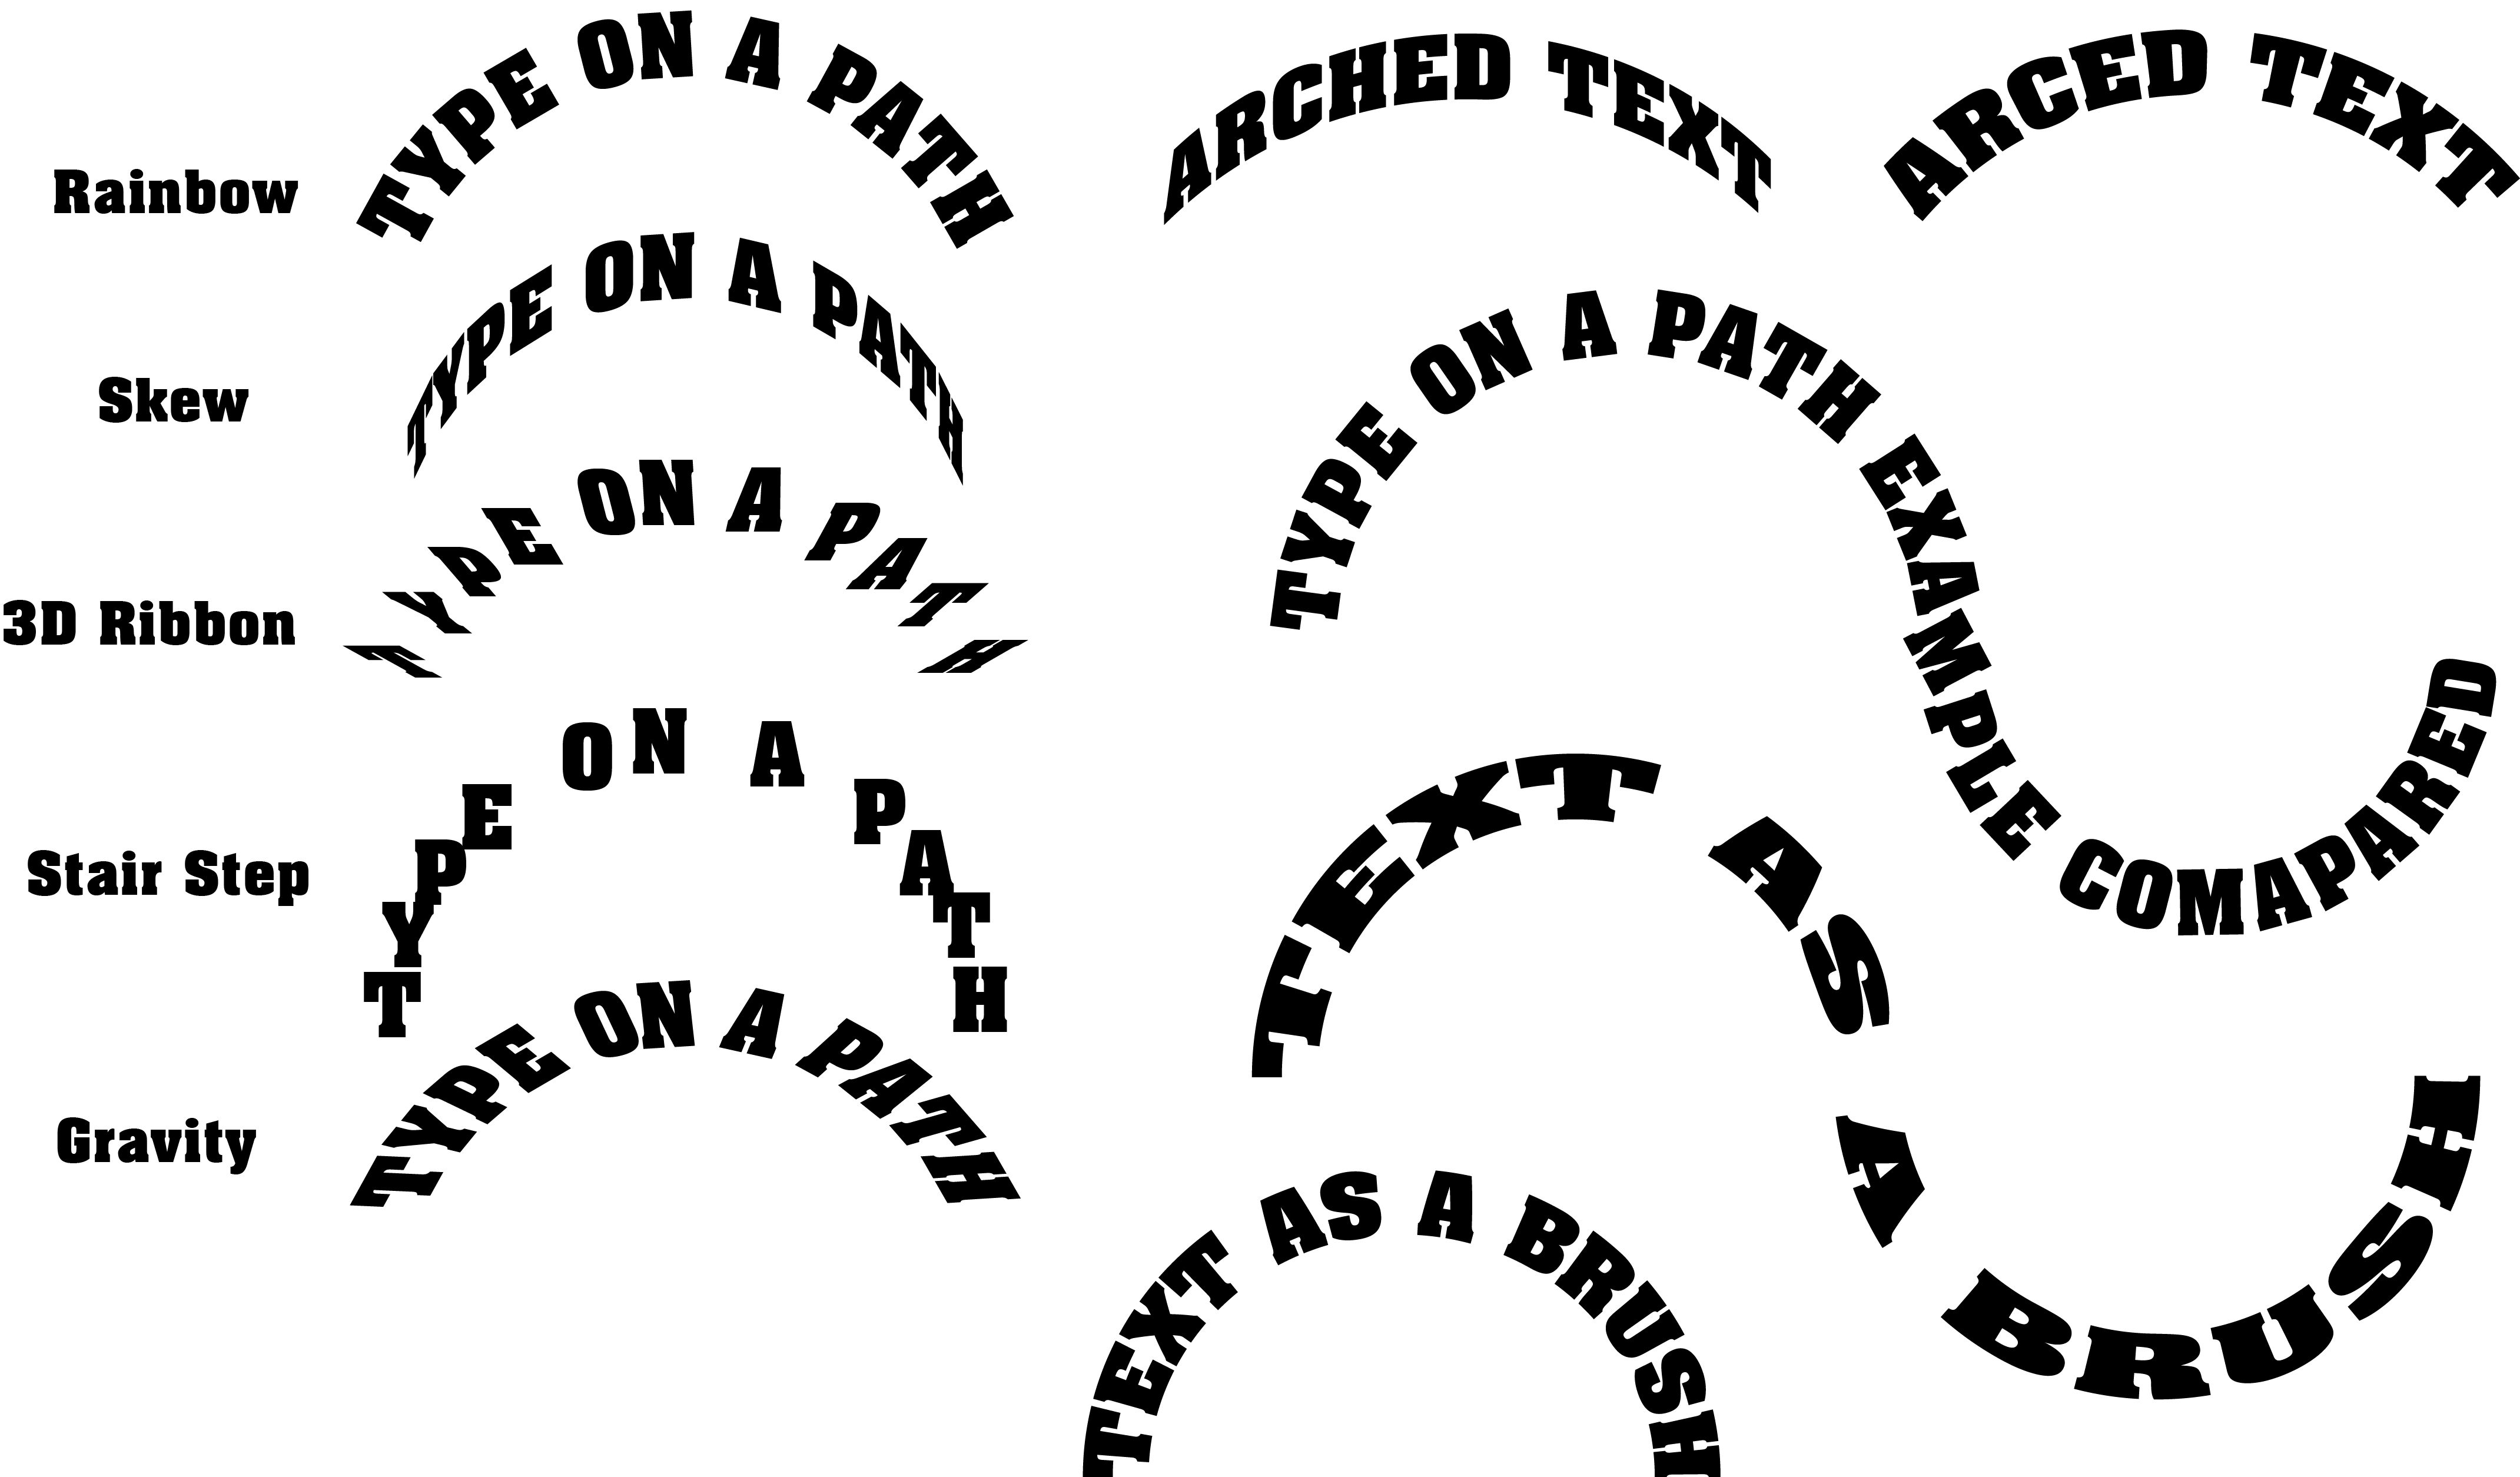 Adobe Illustrator Arched text examples - Instructional Contributions